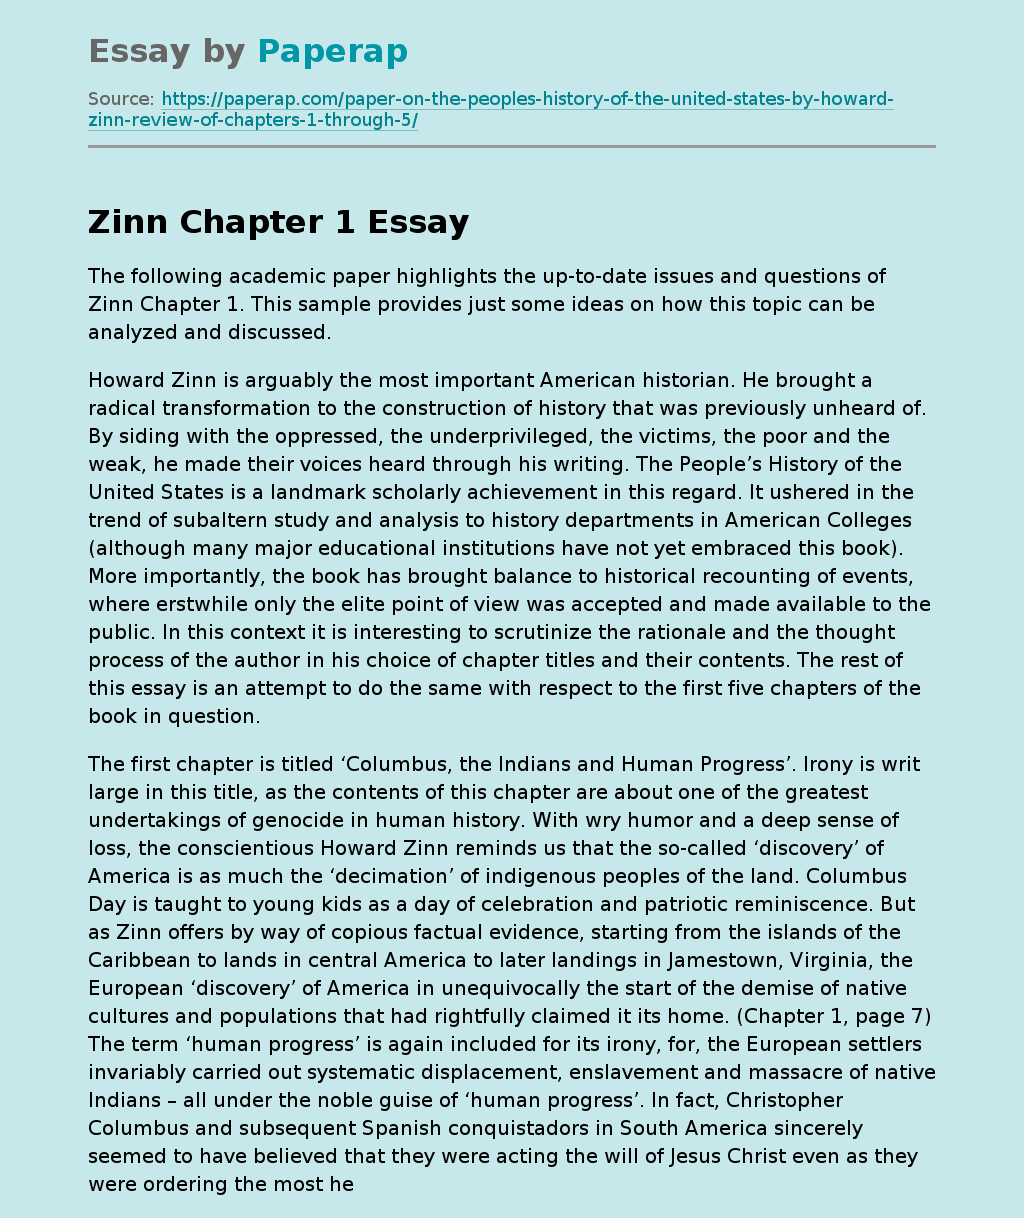 Zinn Chapter 1: Current Issues and Questions